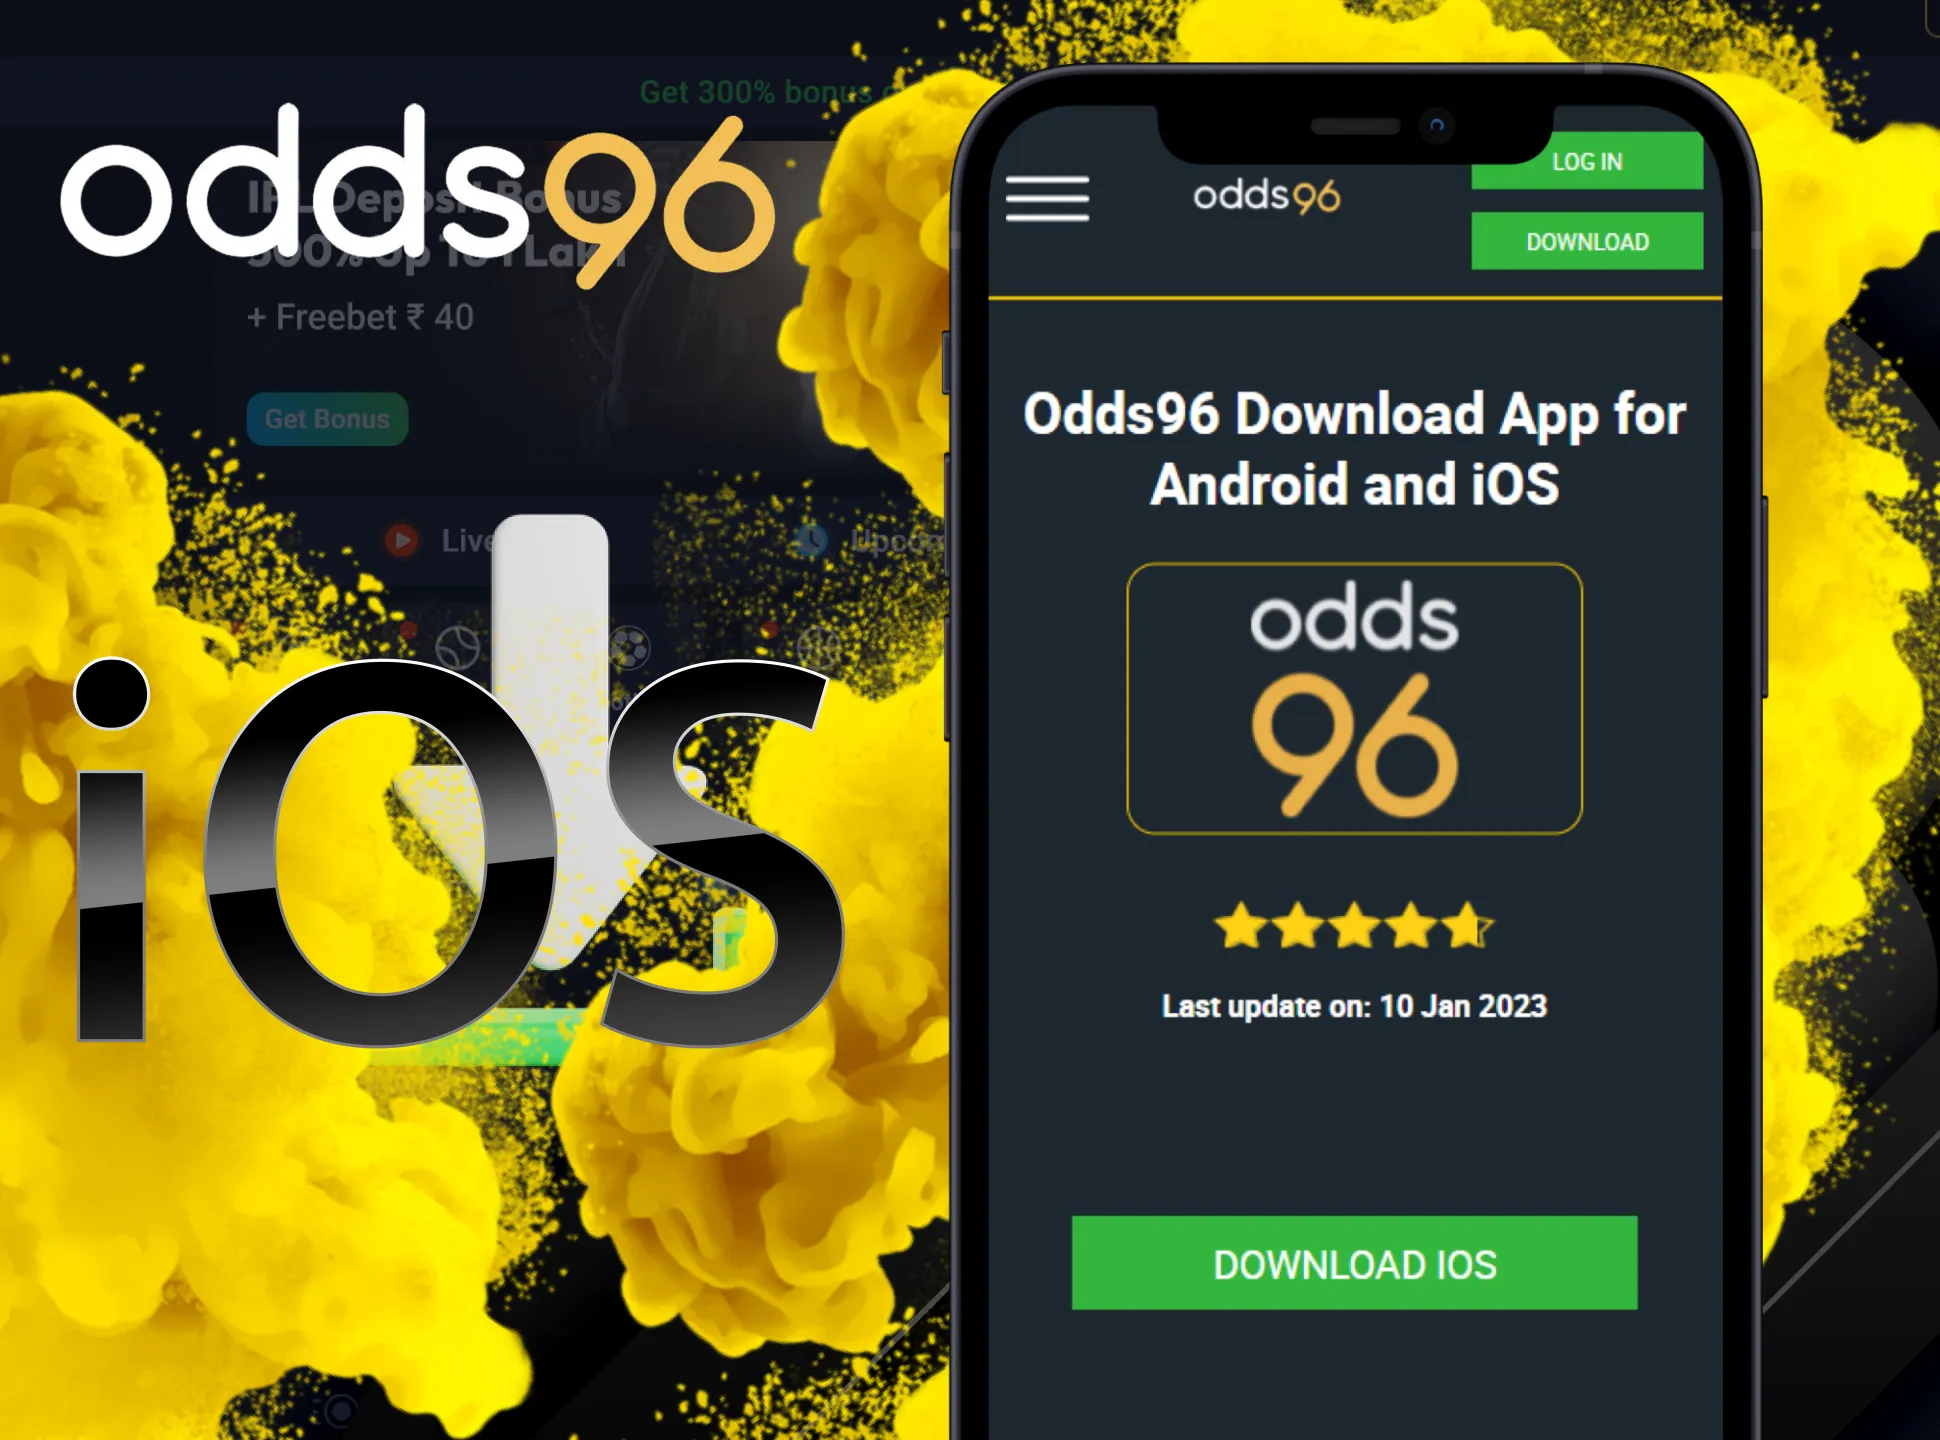 Download and install Odds96 app on your iOS device.